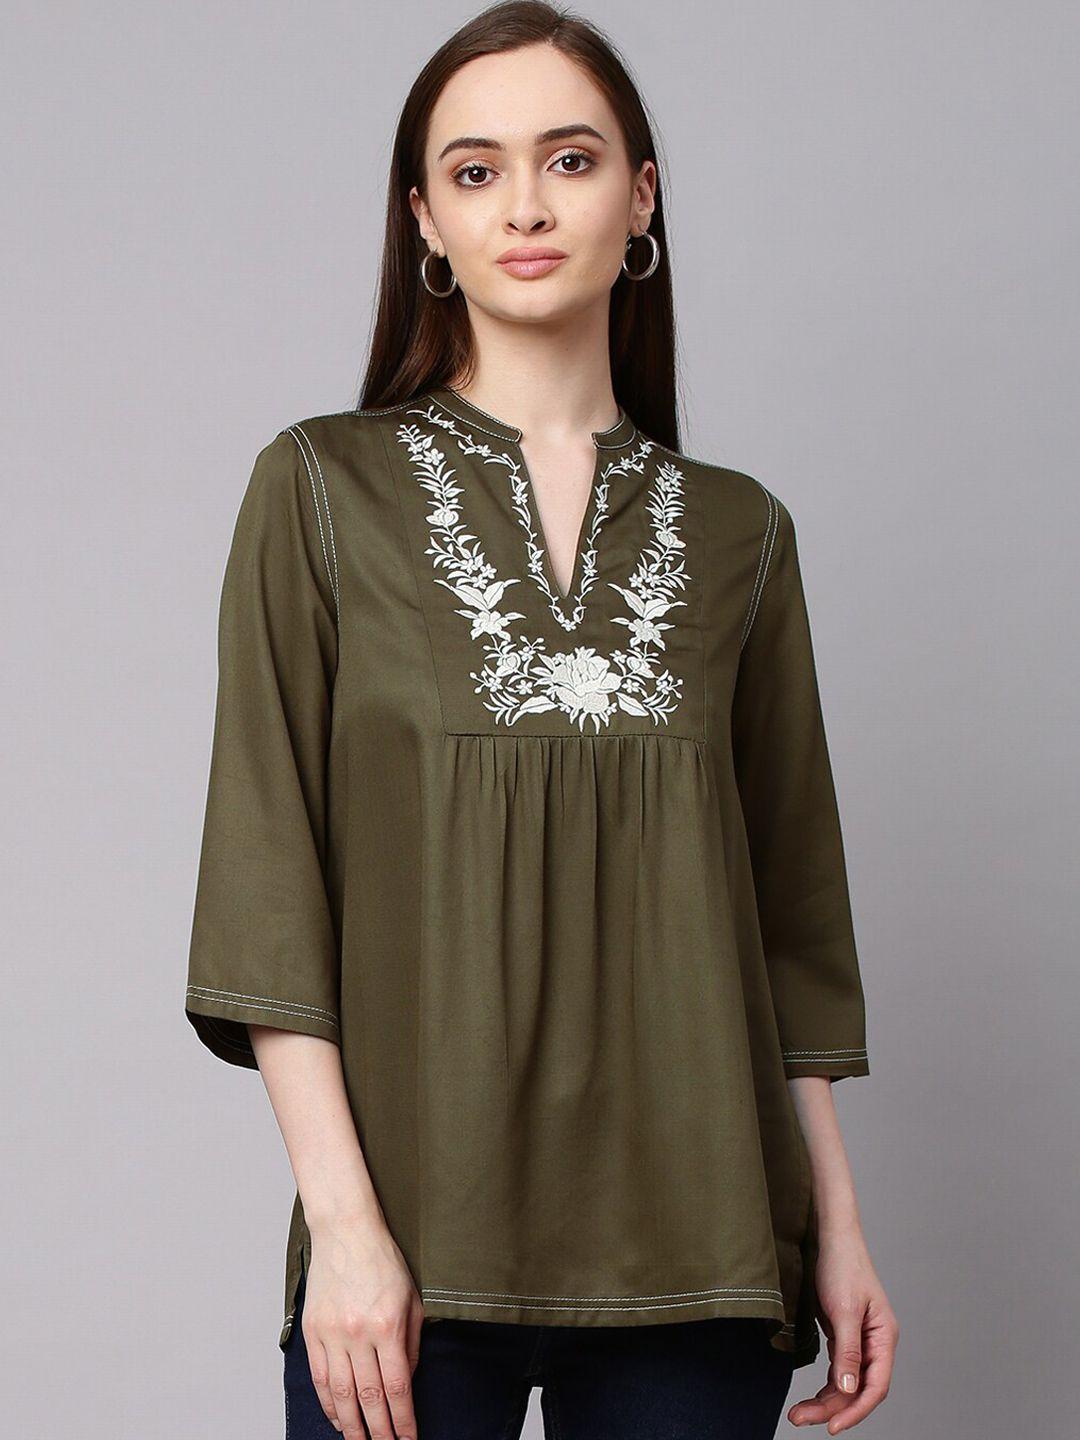 modern-indian-by-chemistry-women-olive-green-tunic-with-floral-embroidery